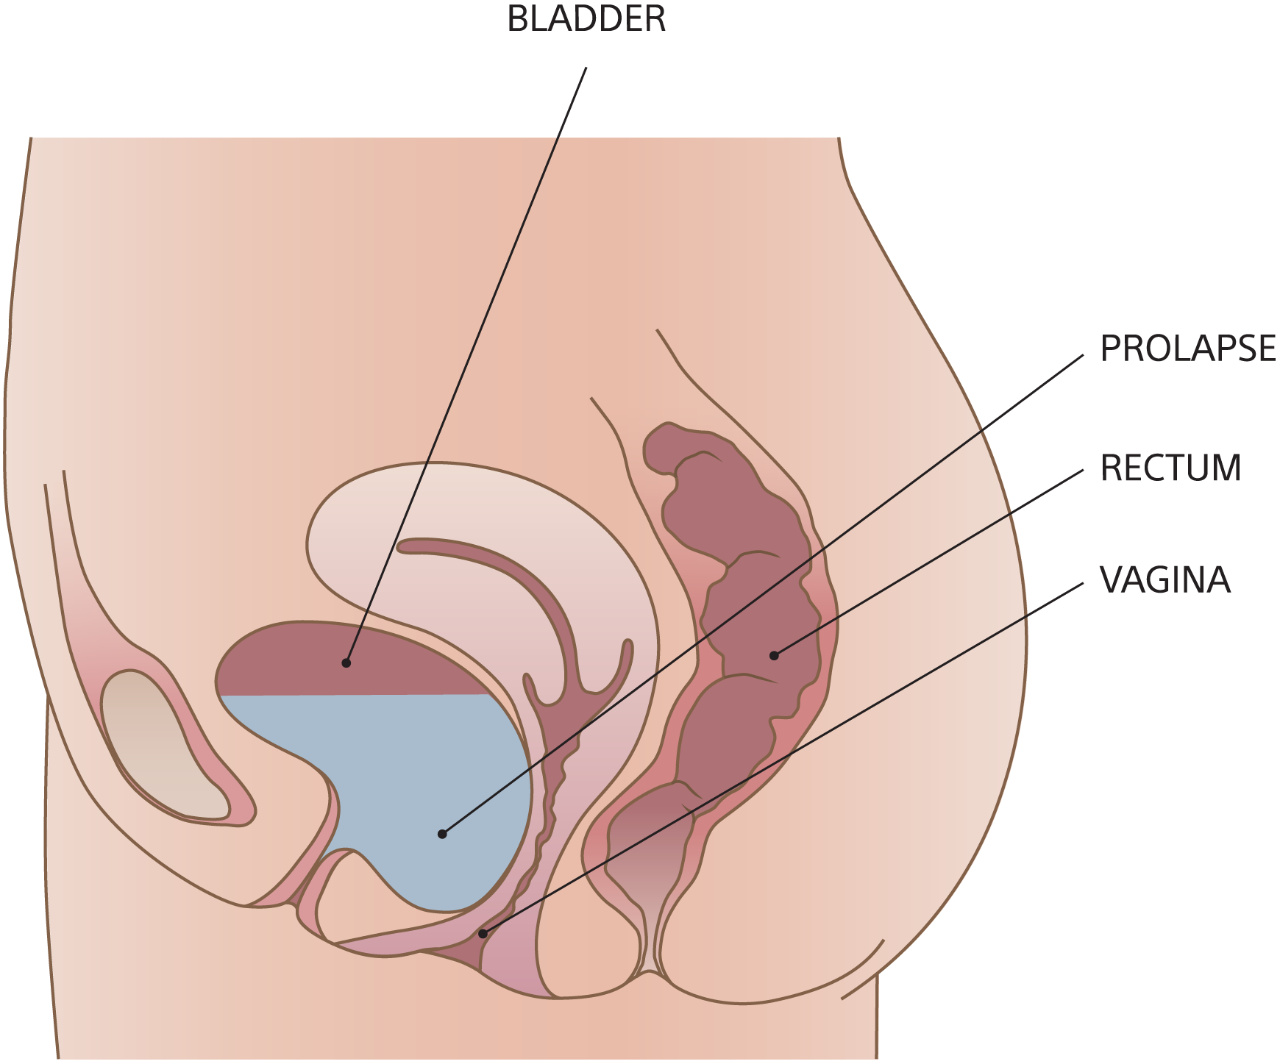 Diagram of cystocele formation with bladder, rectum, vagina, and prolapse.